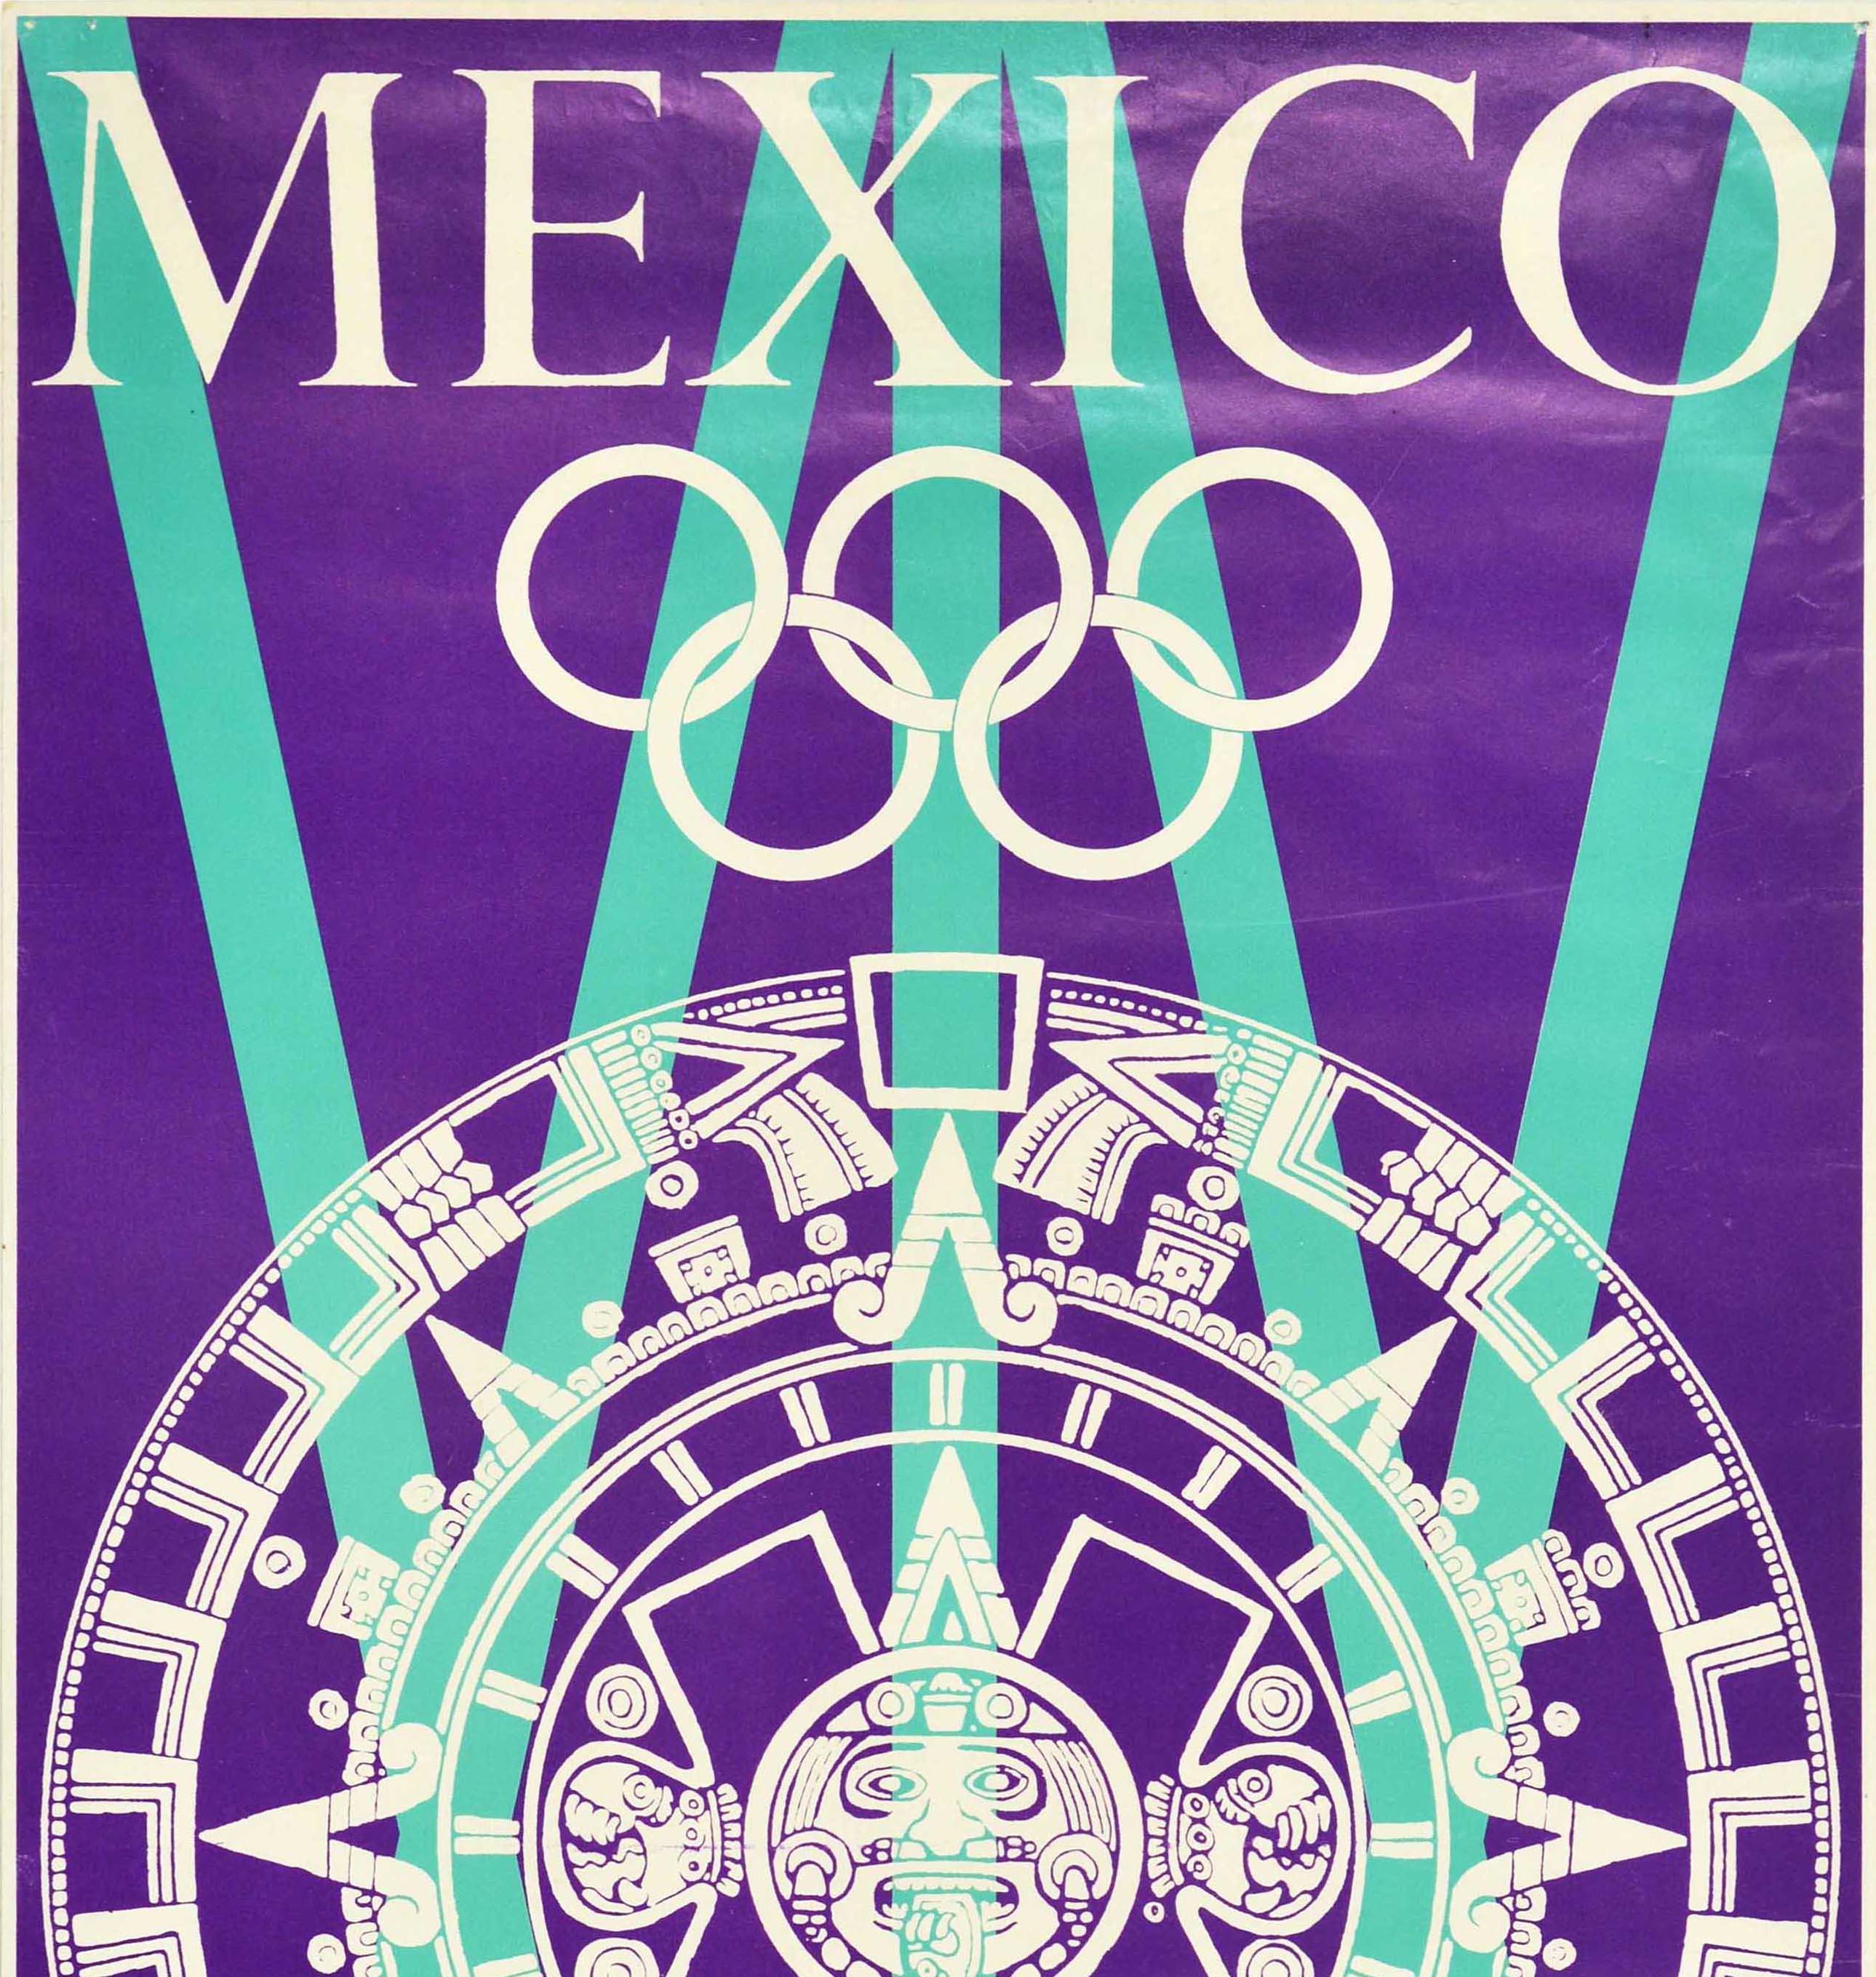 Mexican Original Vintage Sports Poster Mexico Olympic Games 1968 Aztec Sun Sculpture Art For Sale